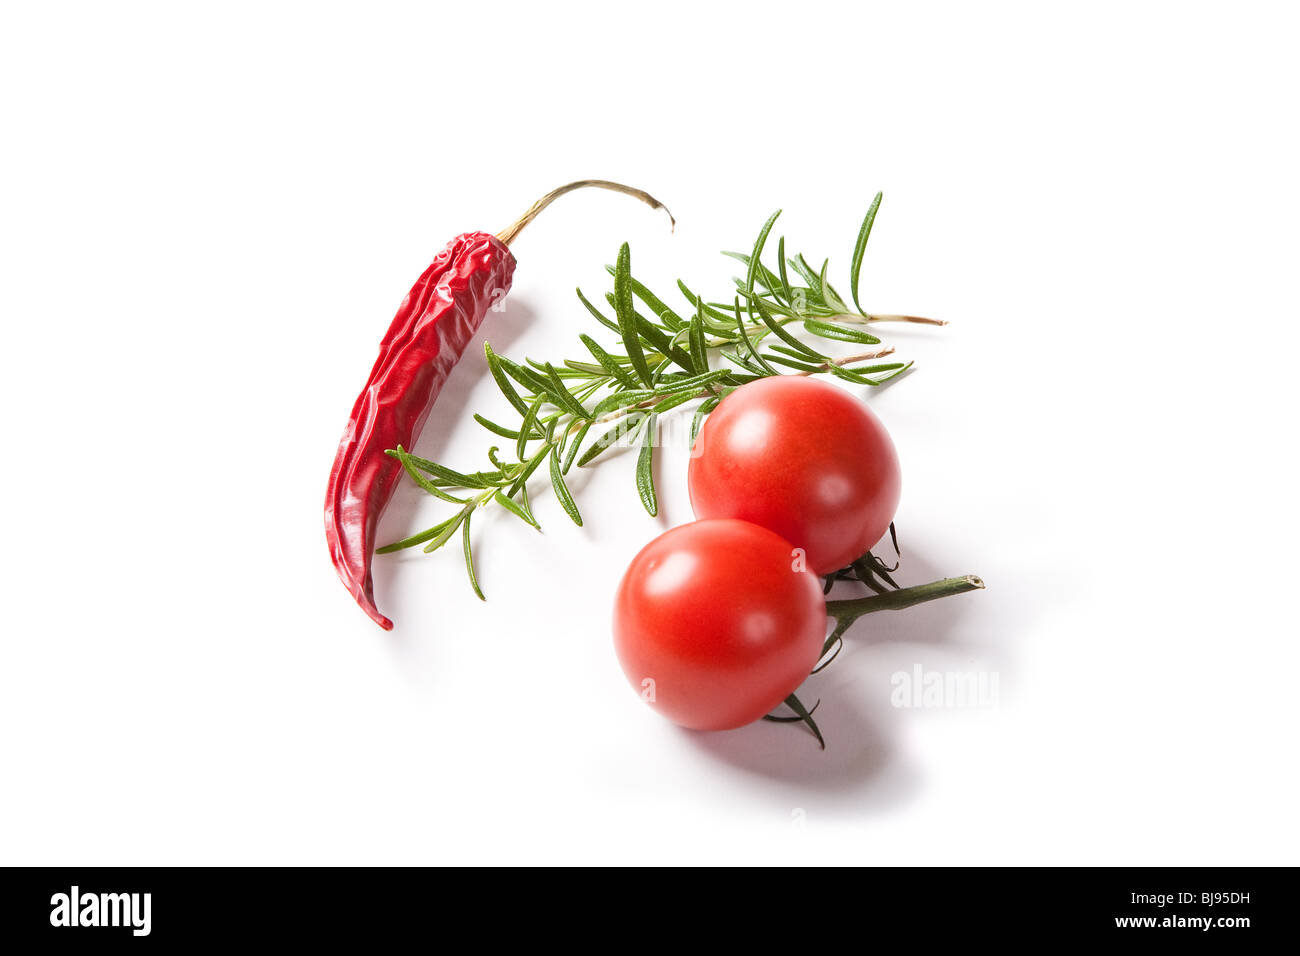 Chili pepper tomatoes and rosemary on white background Stock Photo